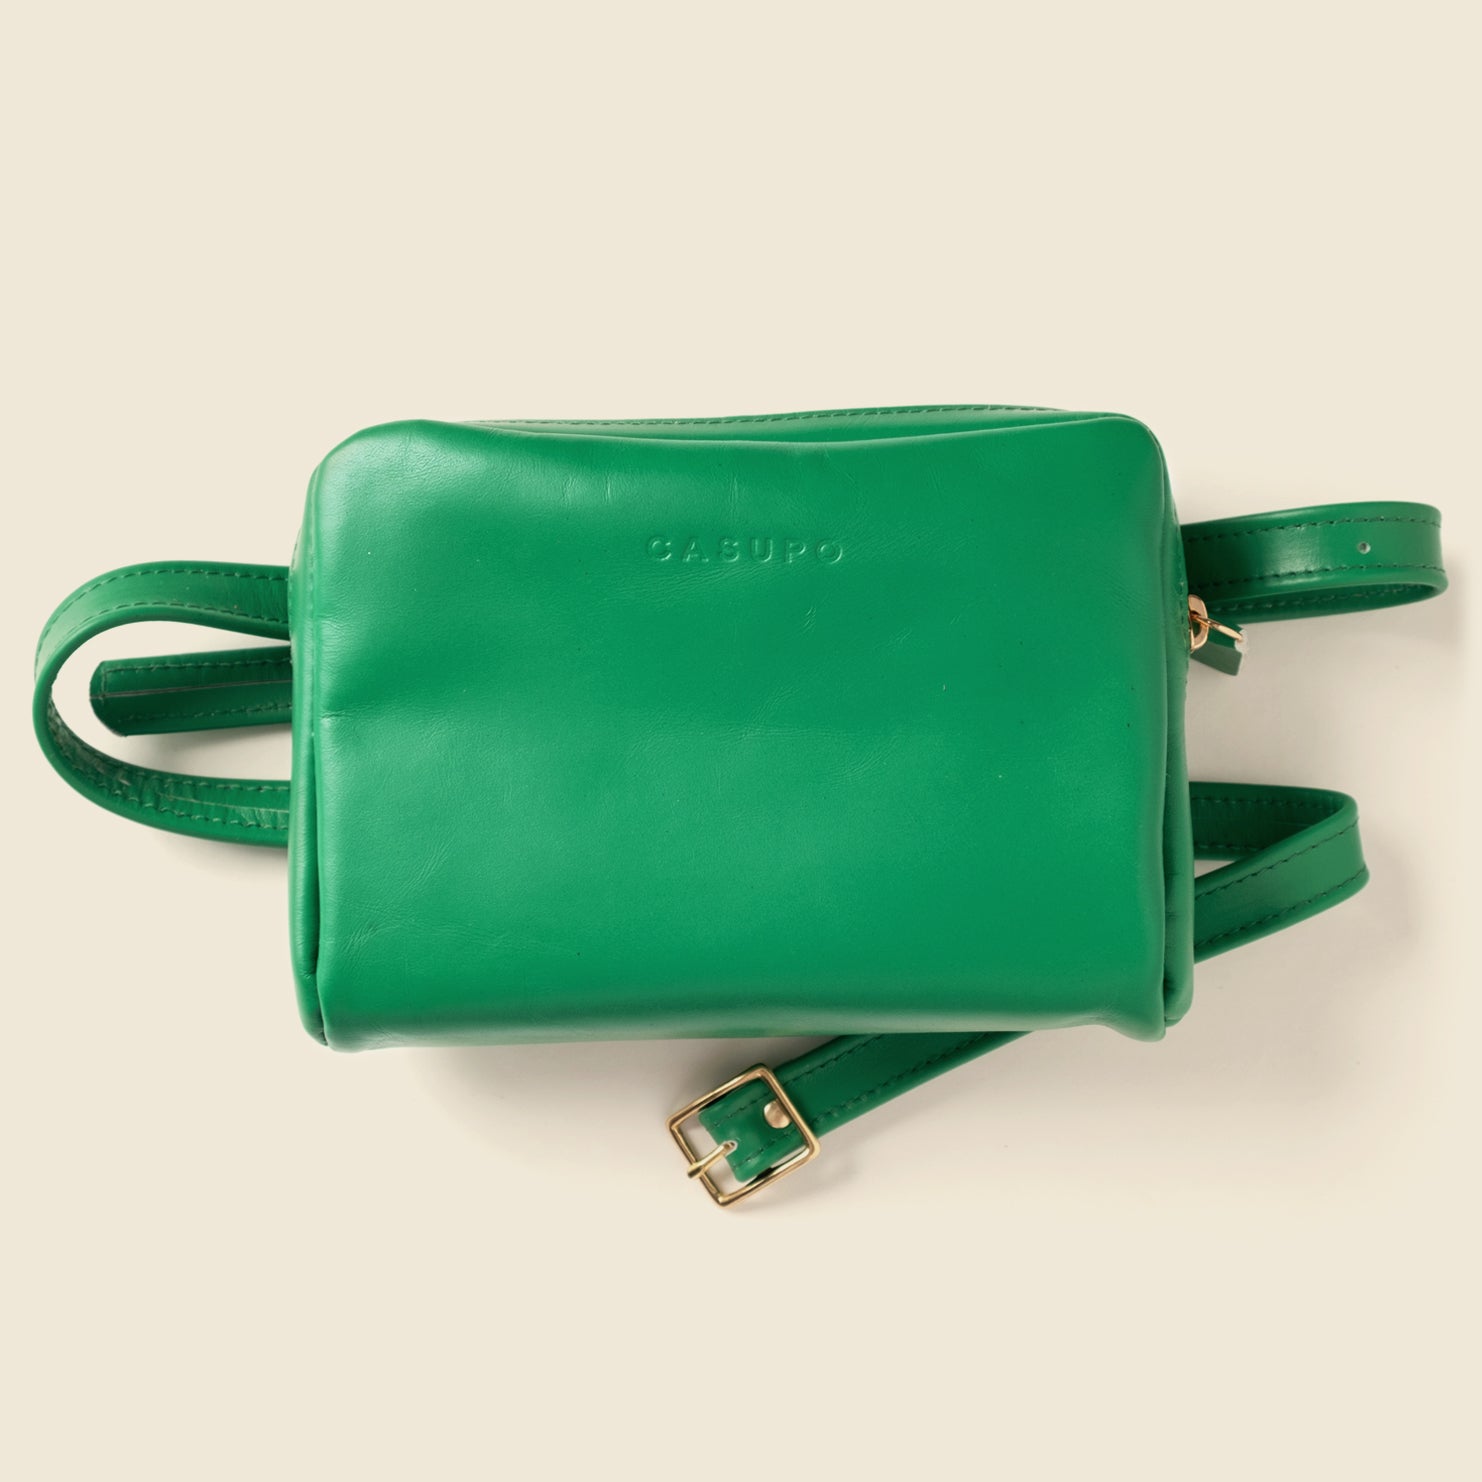 Green leather fanny pack bag for women like clare v and Madewell